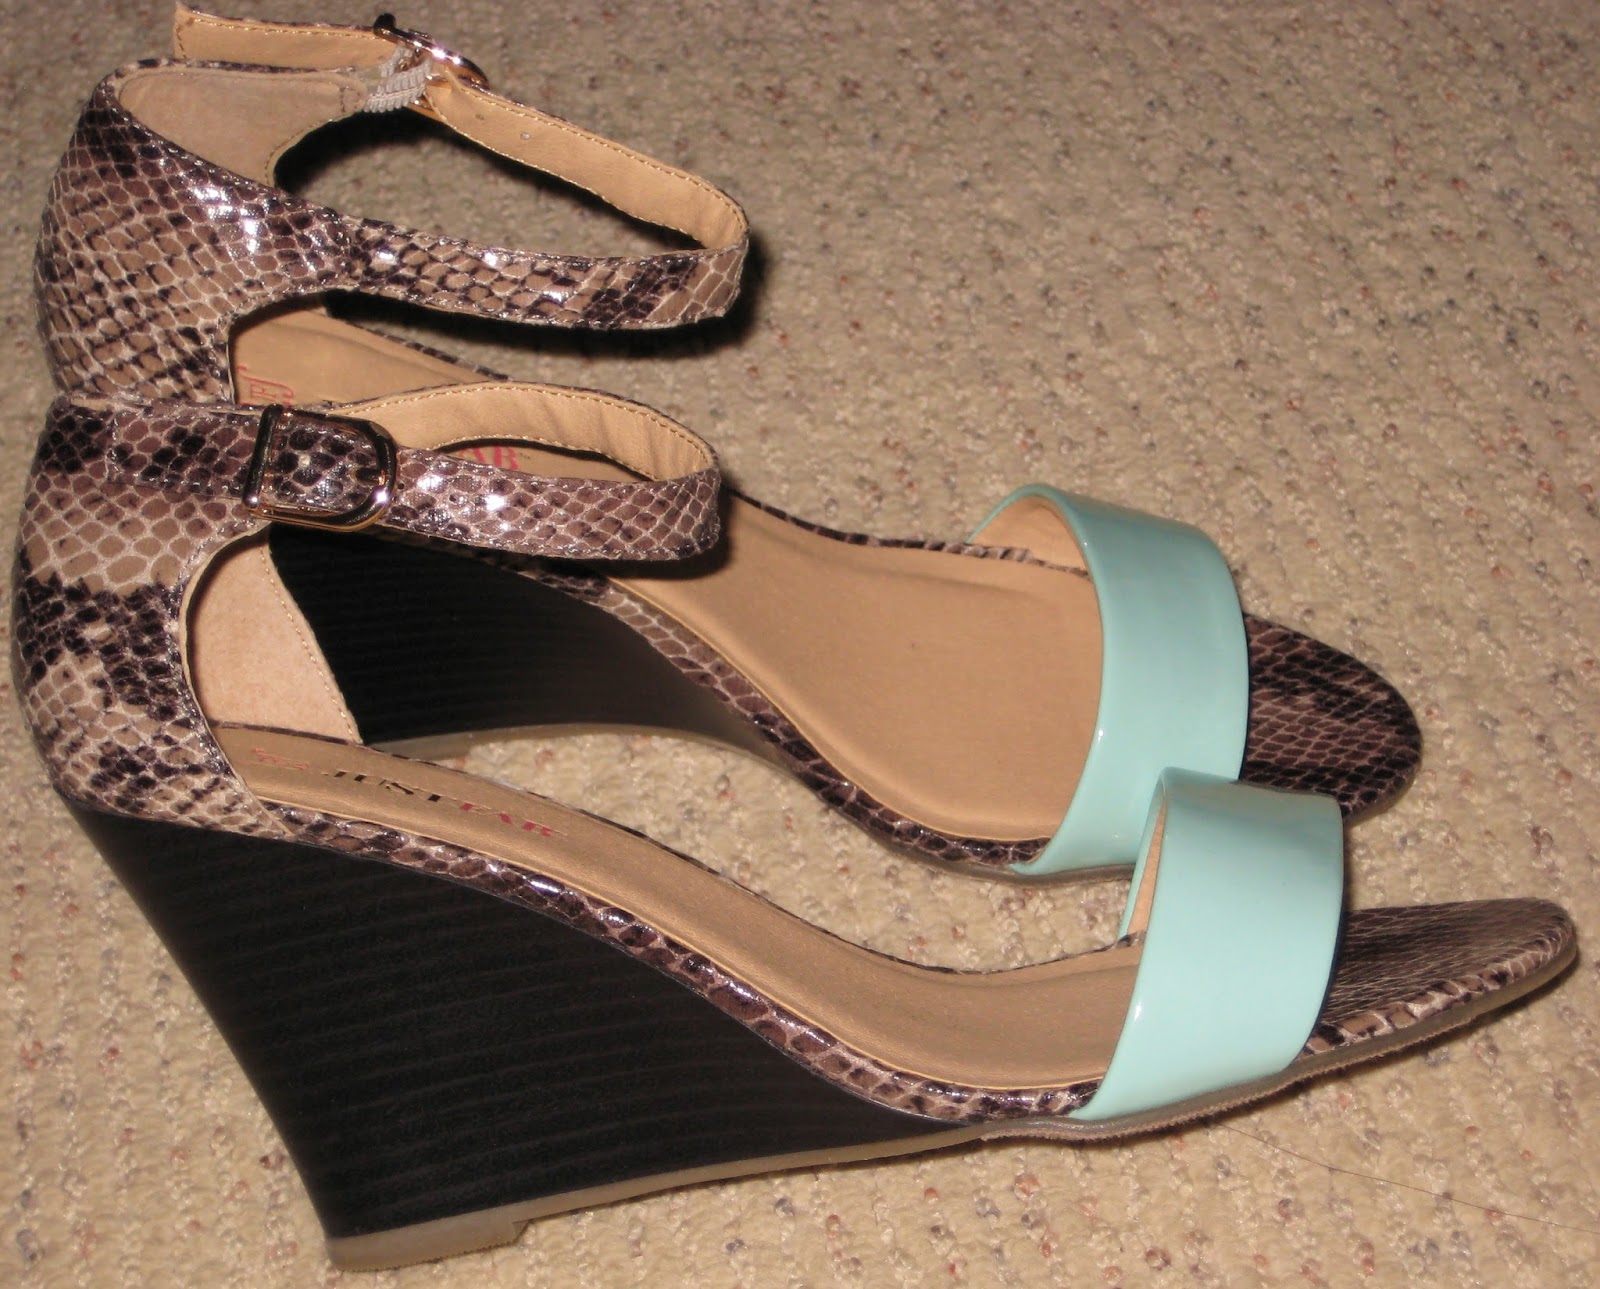 Lady Lostris Beauty: Shoe HAUL: Forever 21, JustFab  Payless